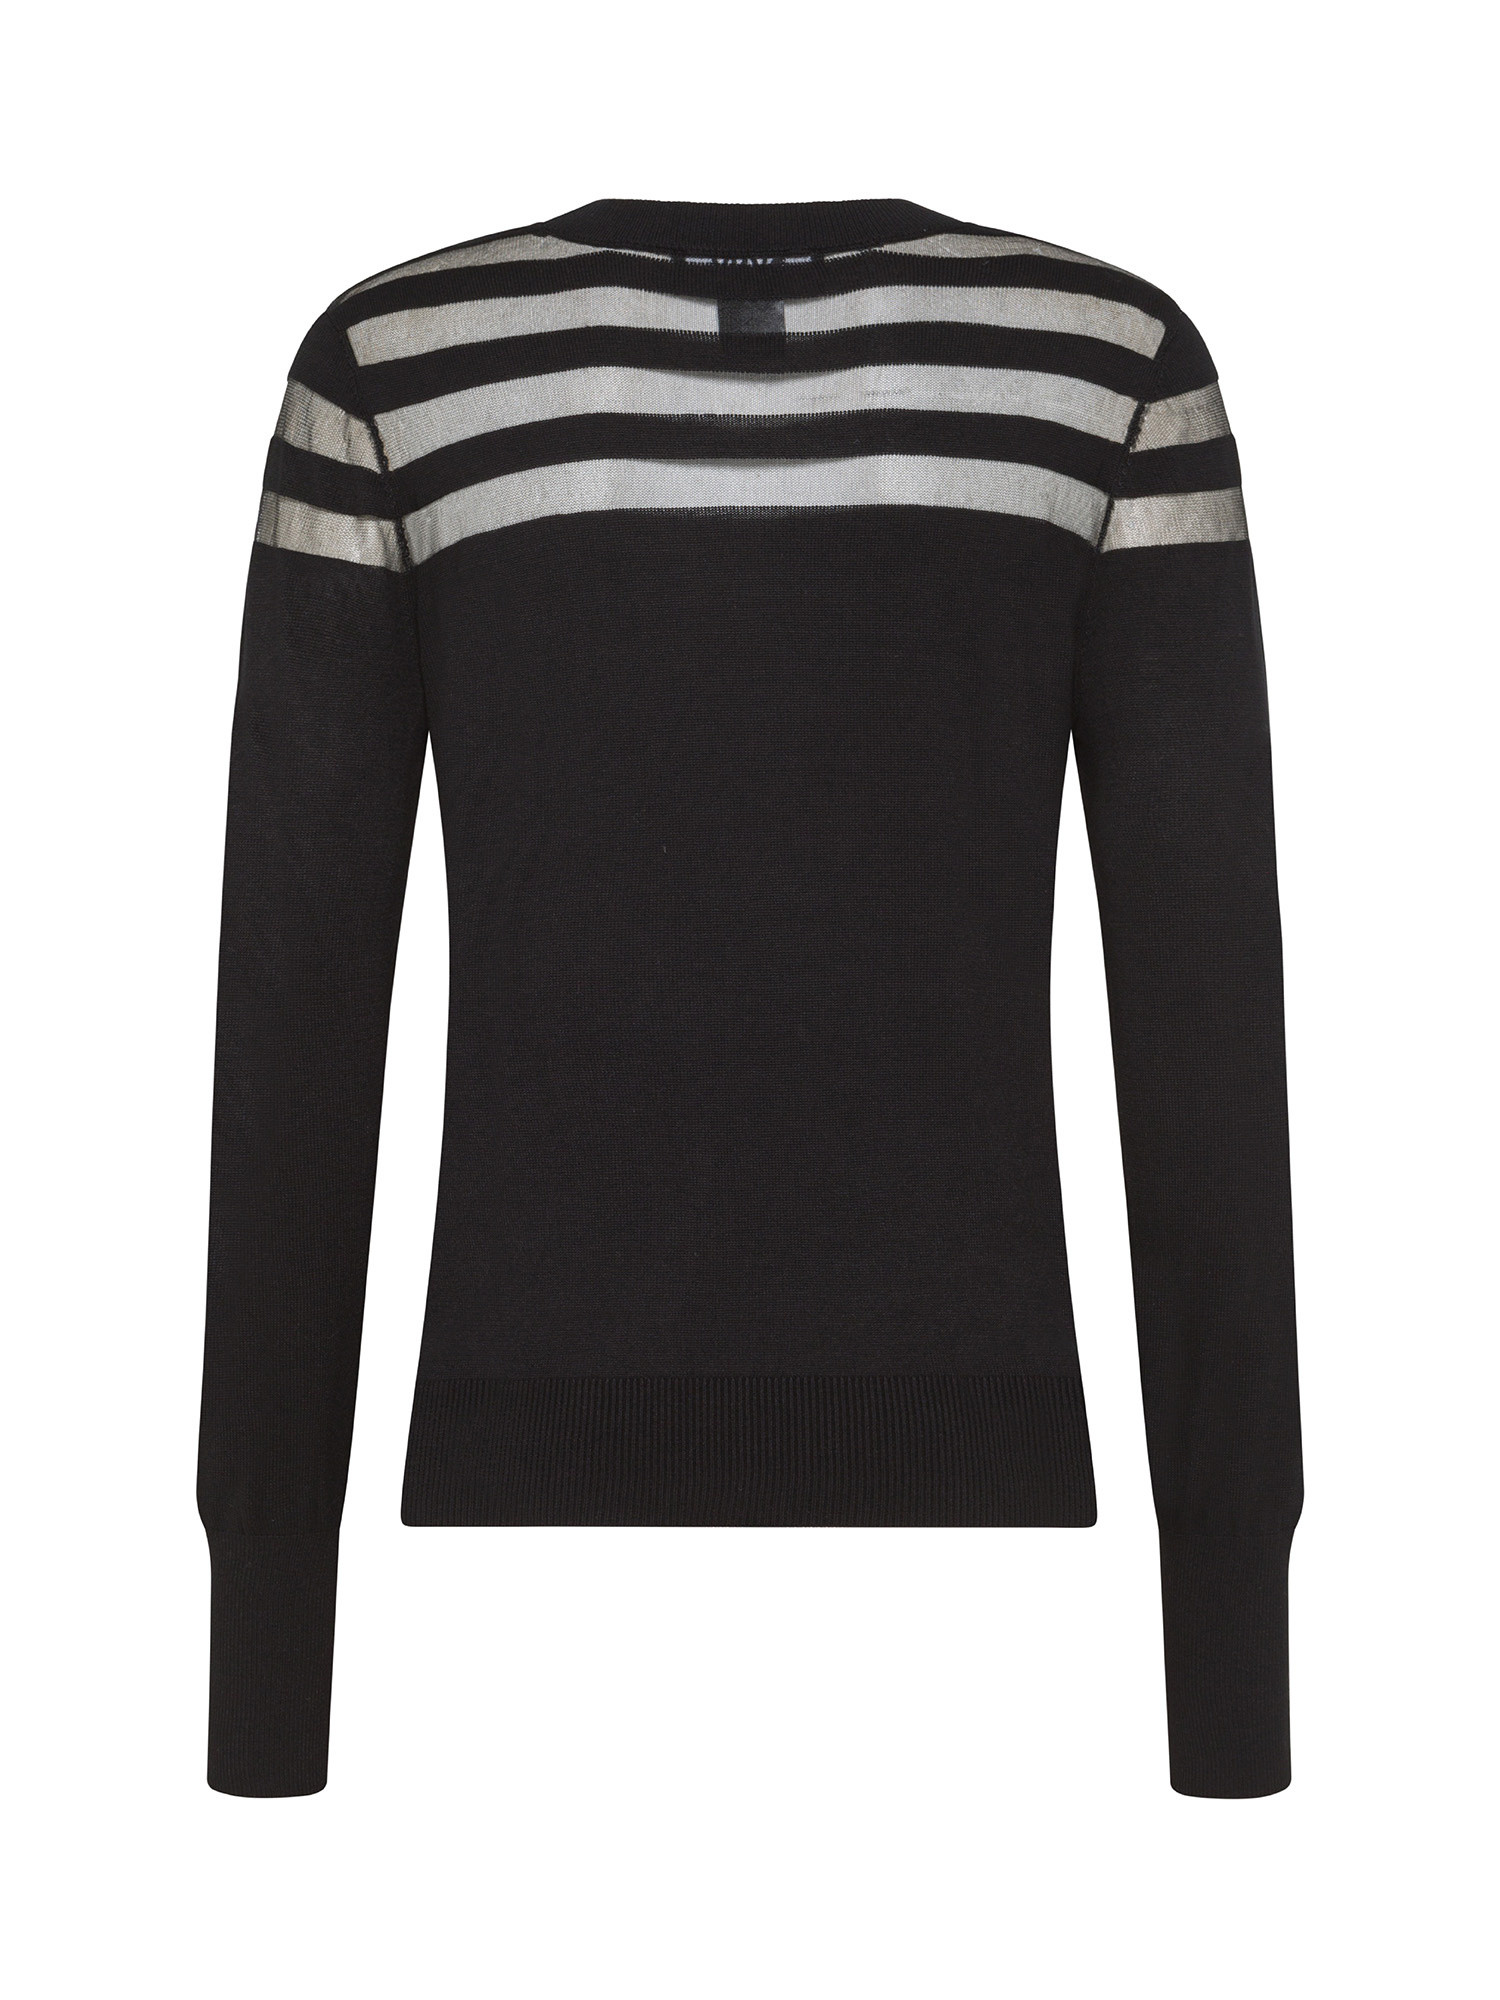 DKNY - Crew neck sweater with striped mesh detail, Black, large image number 1